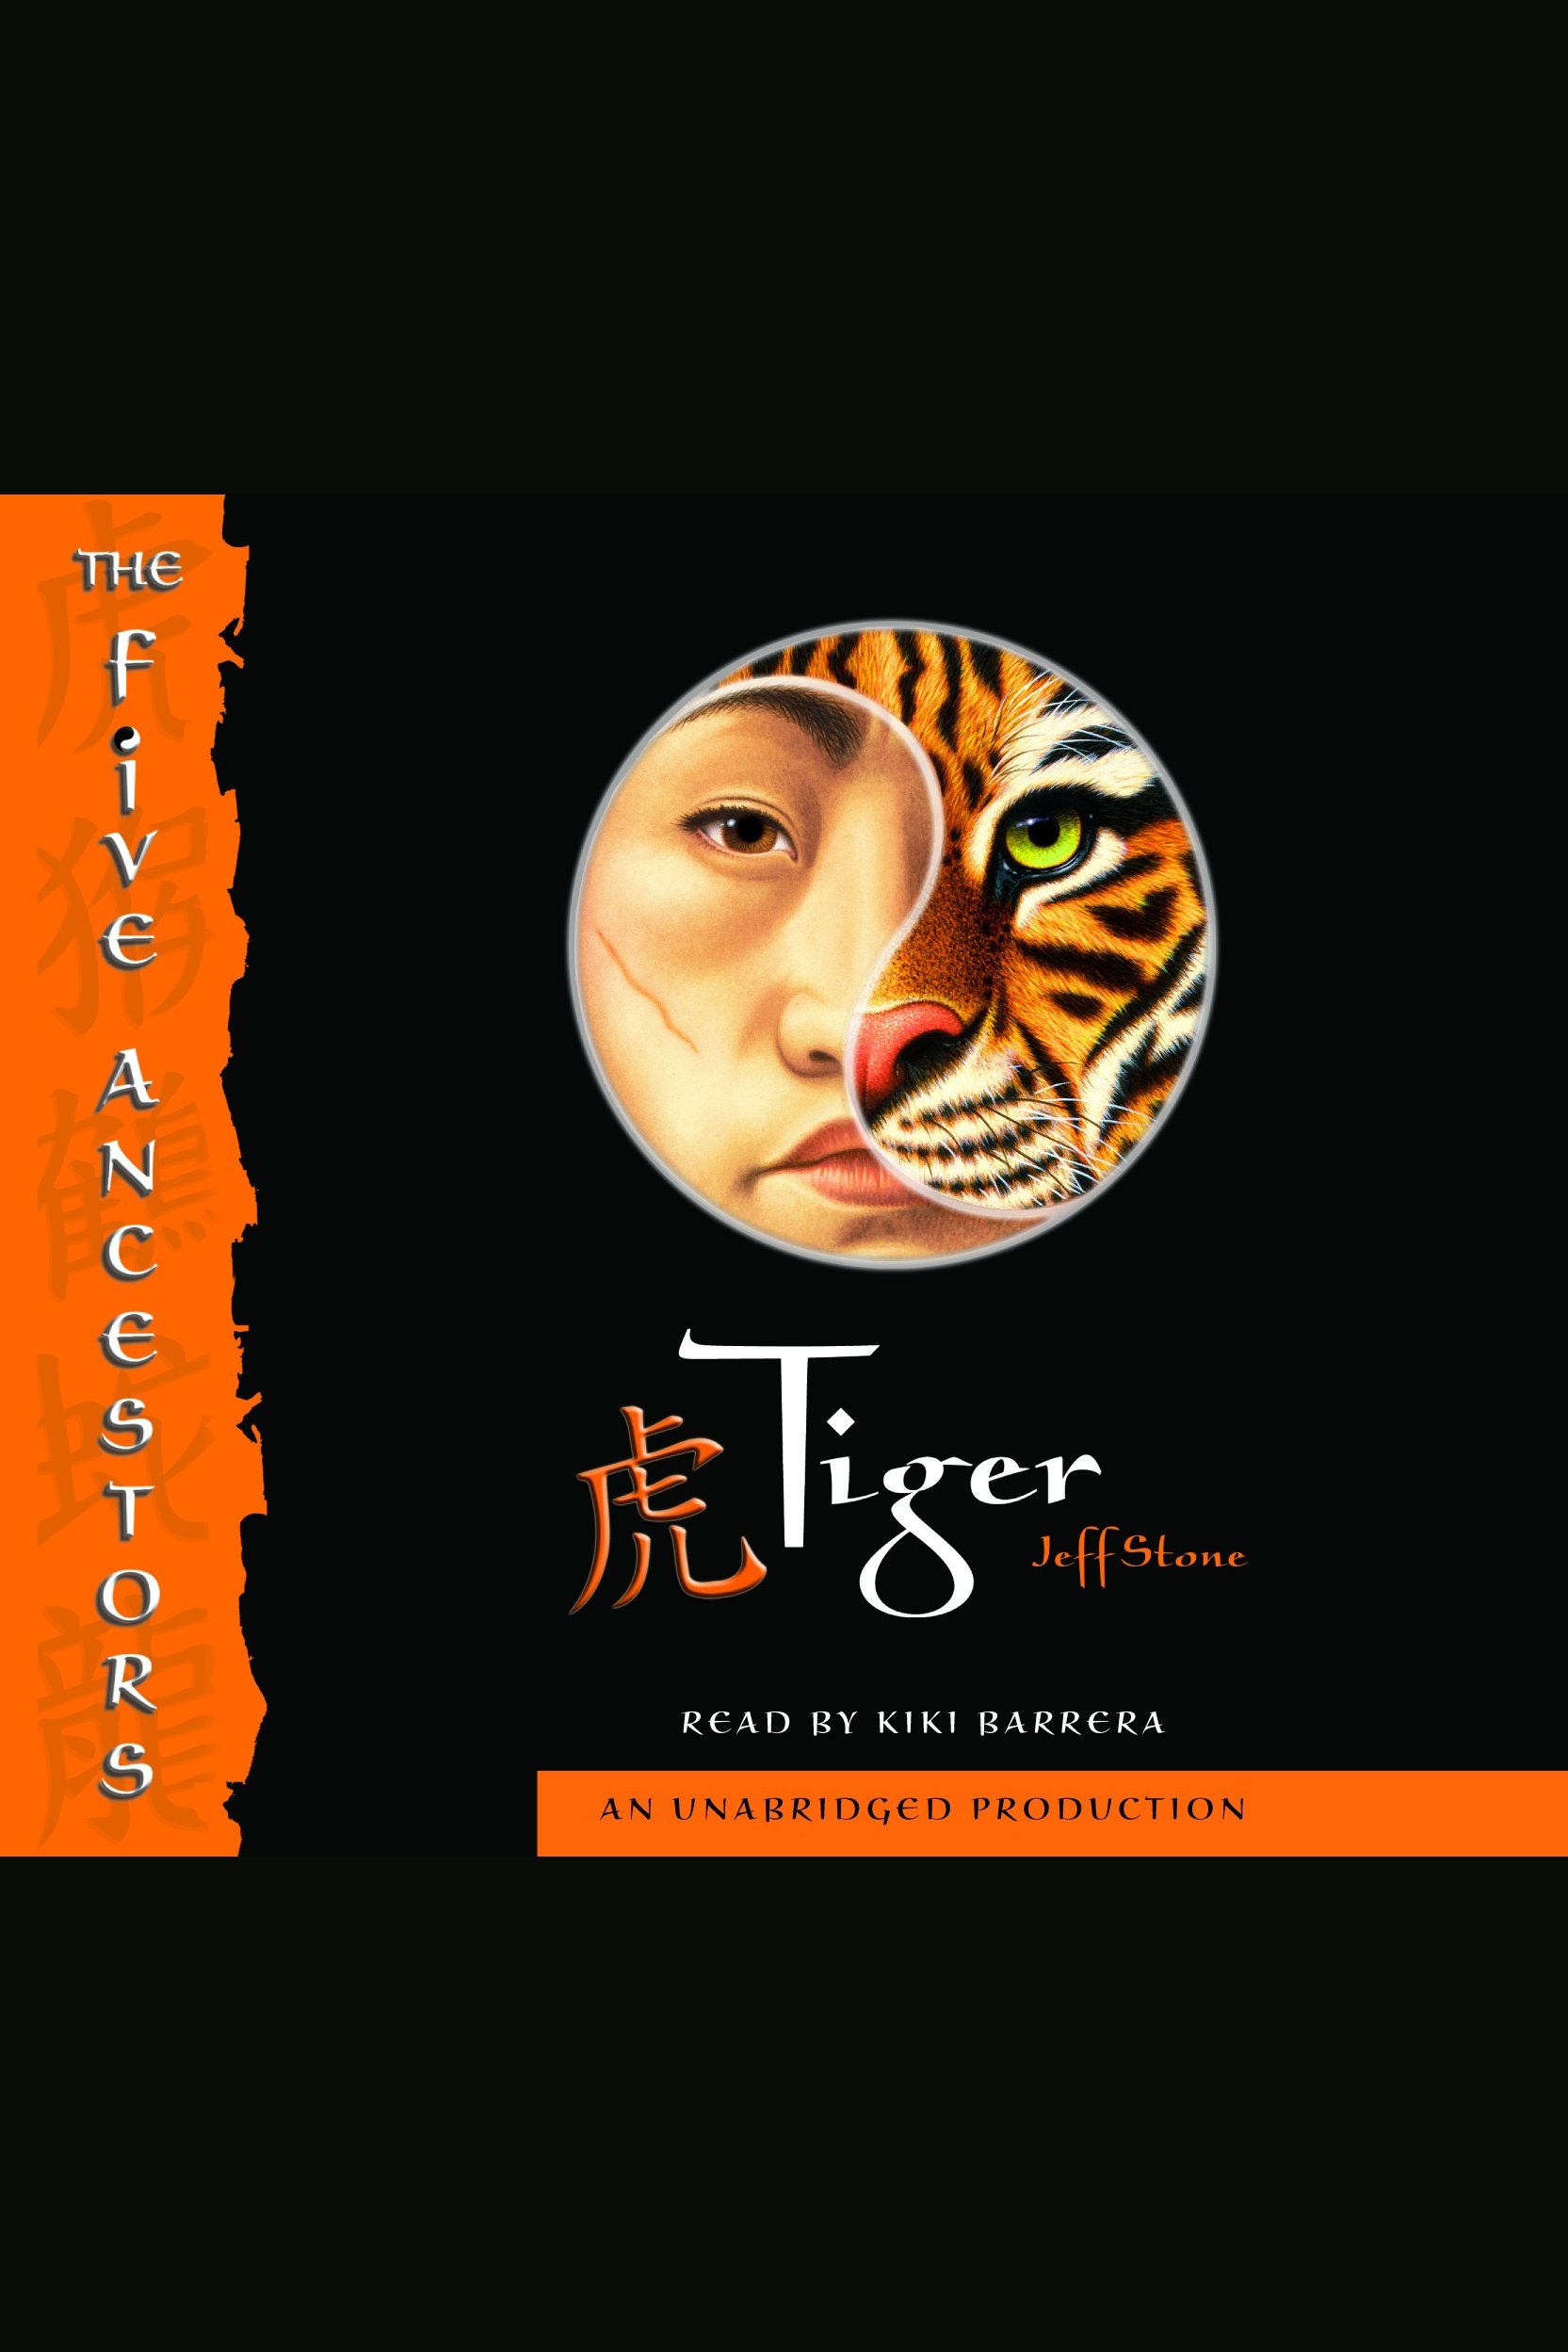 Tiger cover image